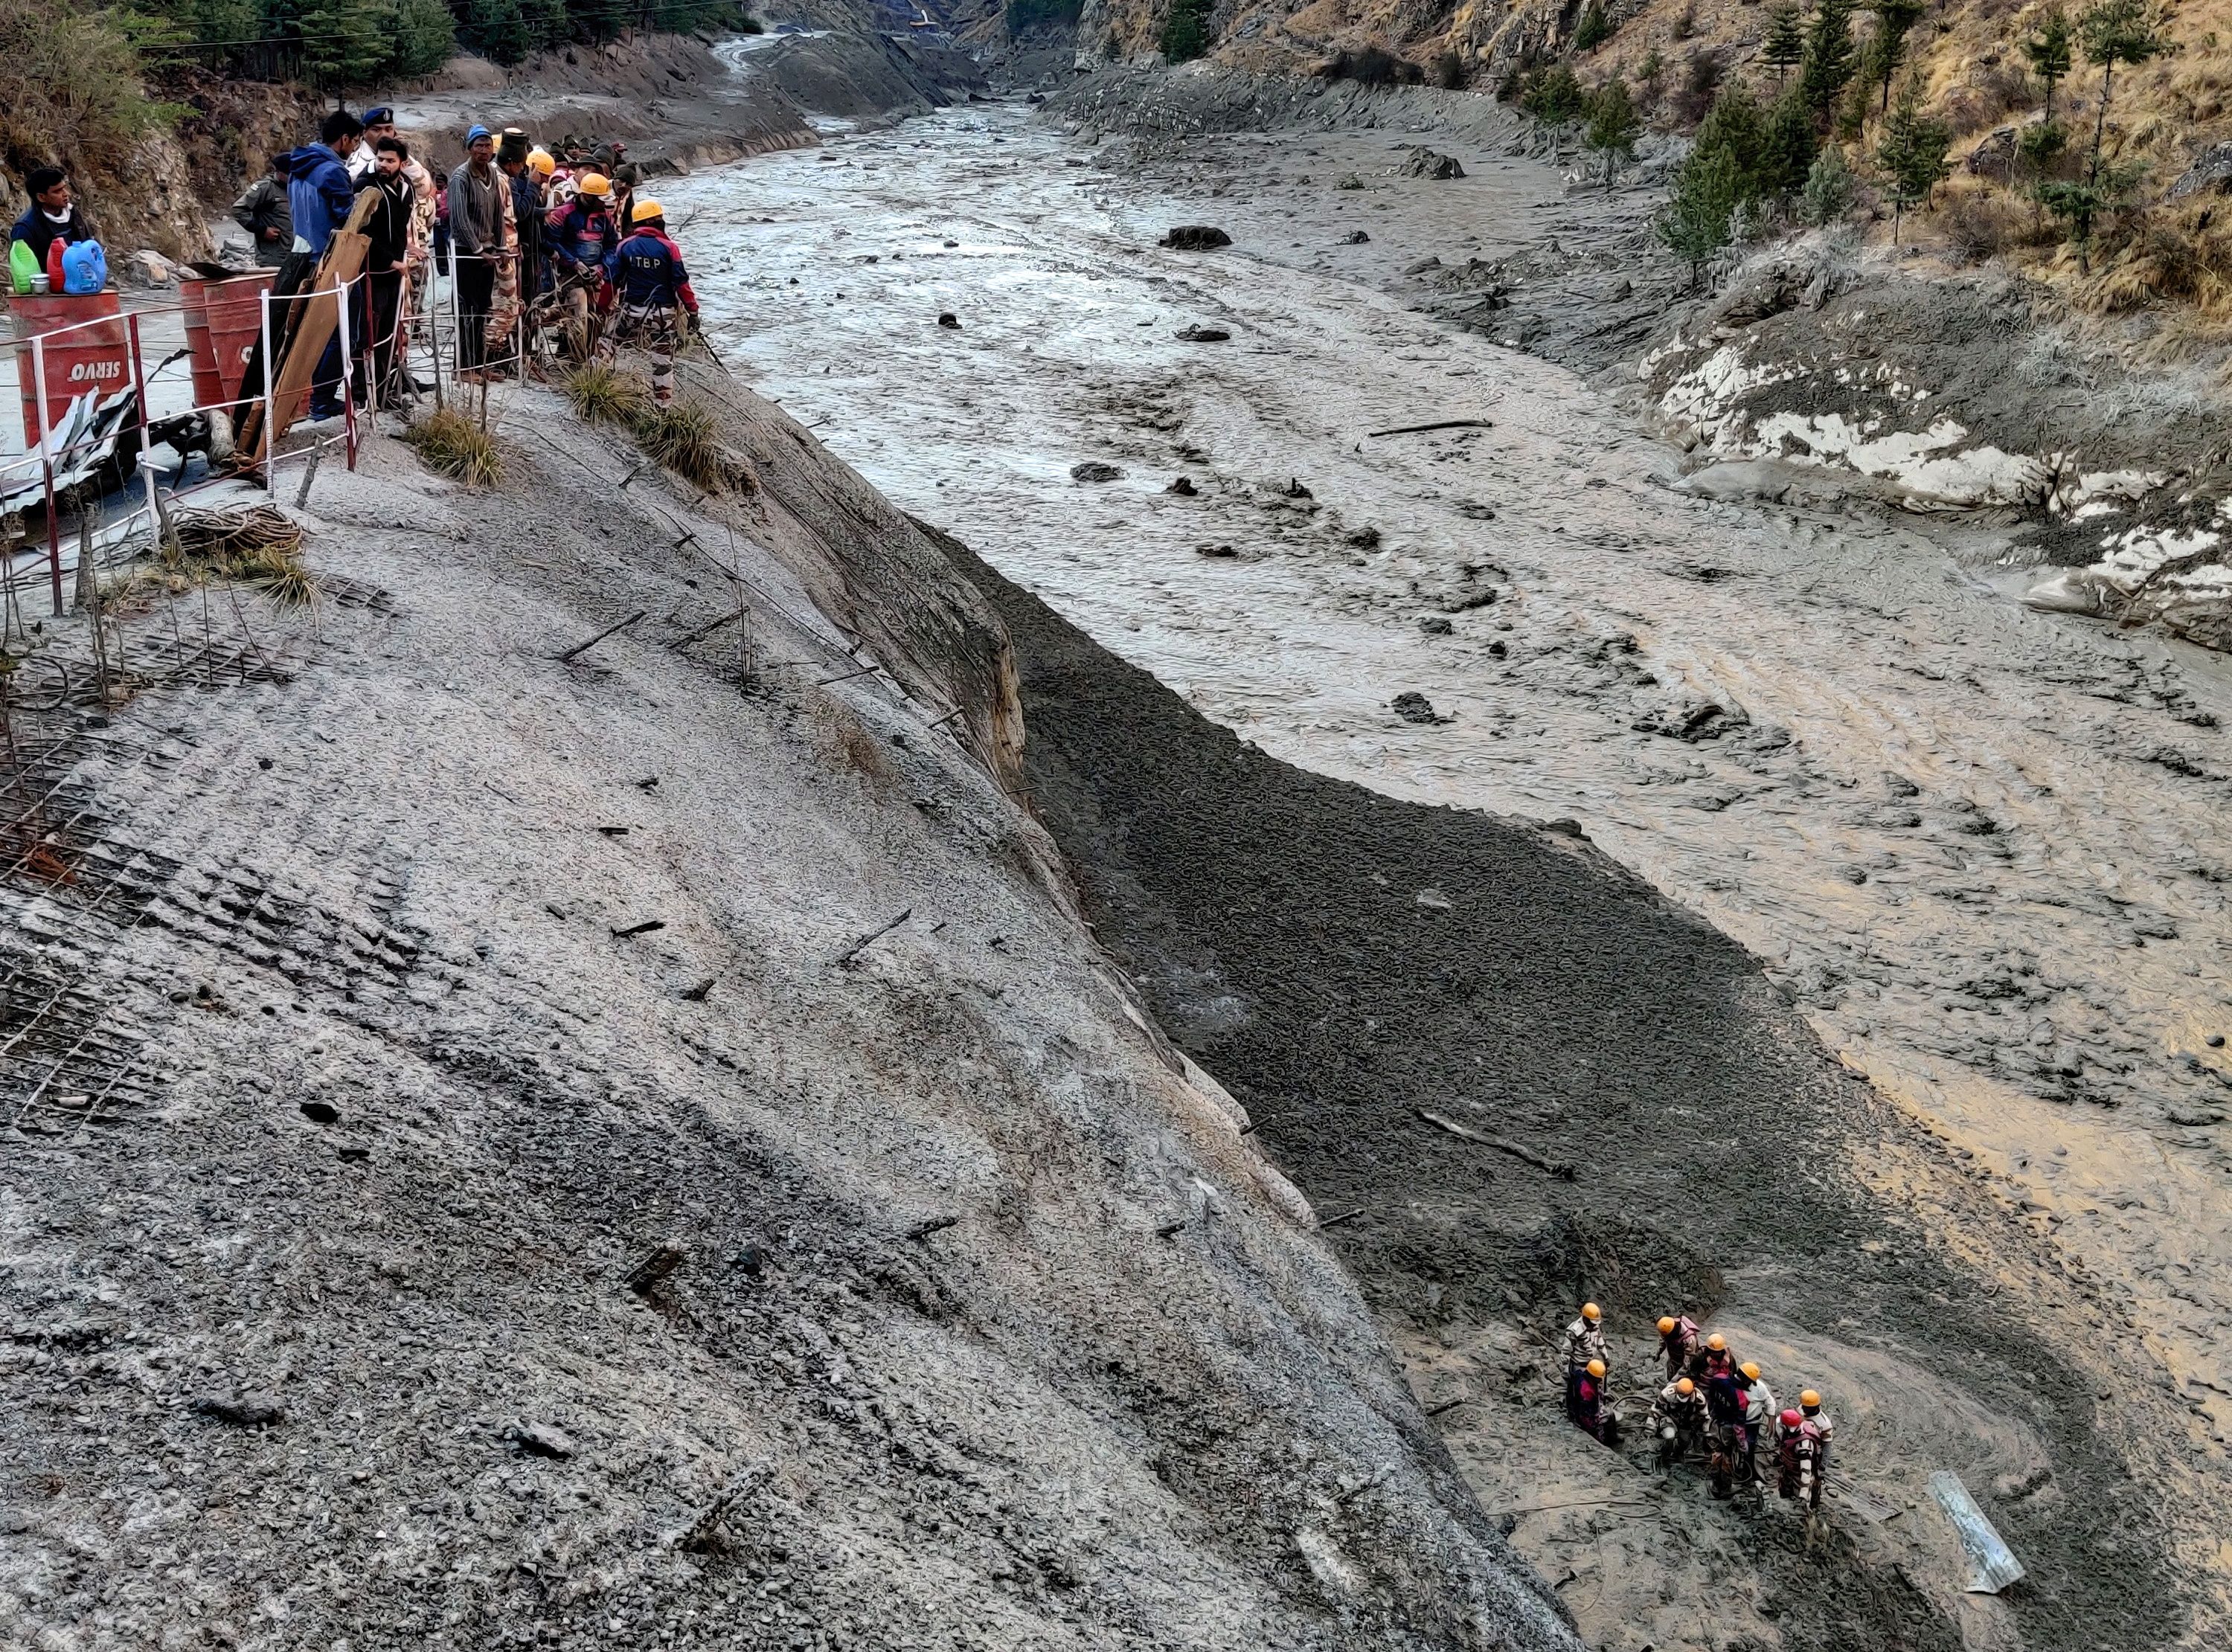 Members of Indo-Tibetan Border Police (ITBP) search for survivors after a Himalayan glacier broke and swept away a small hydroelectric dam, in Chormi village in Tapovan in Uttarakhand, India, February 7, 2021. REUTERS/Stringer 